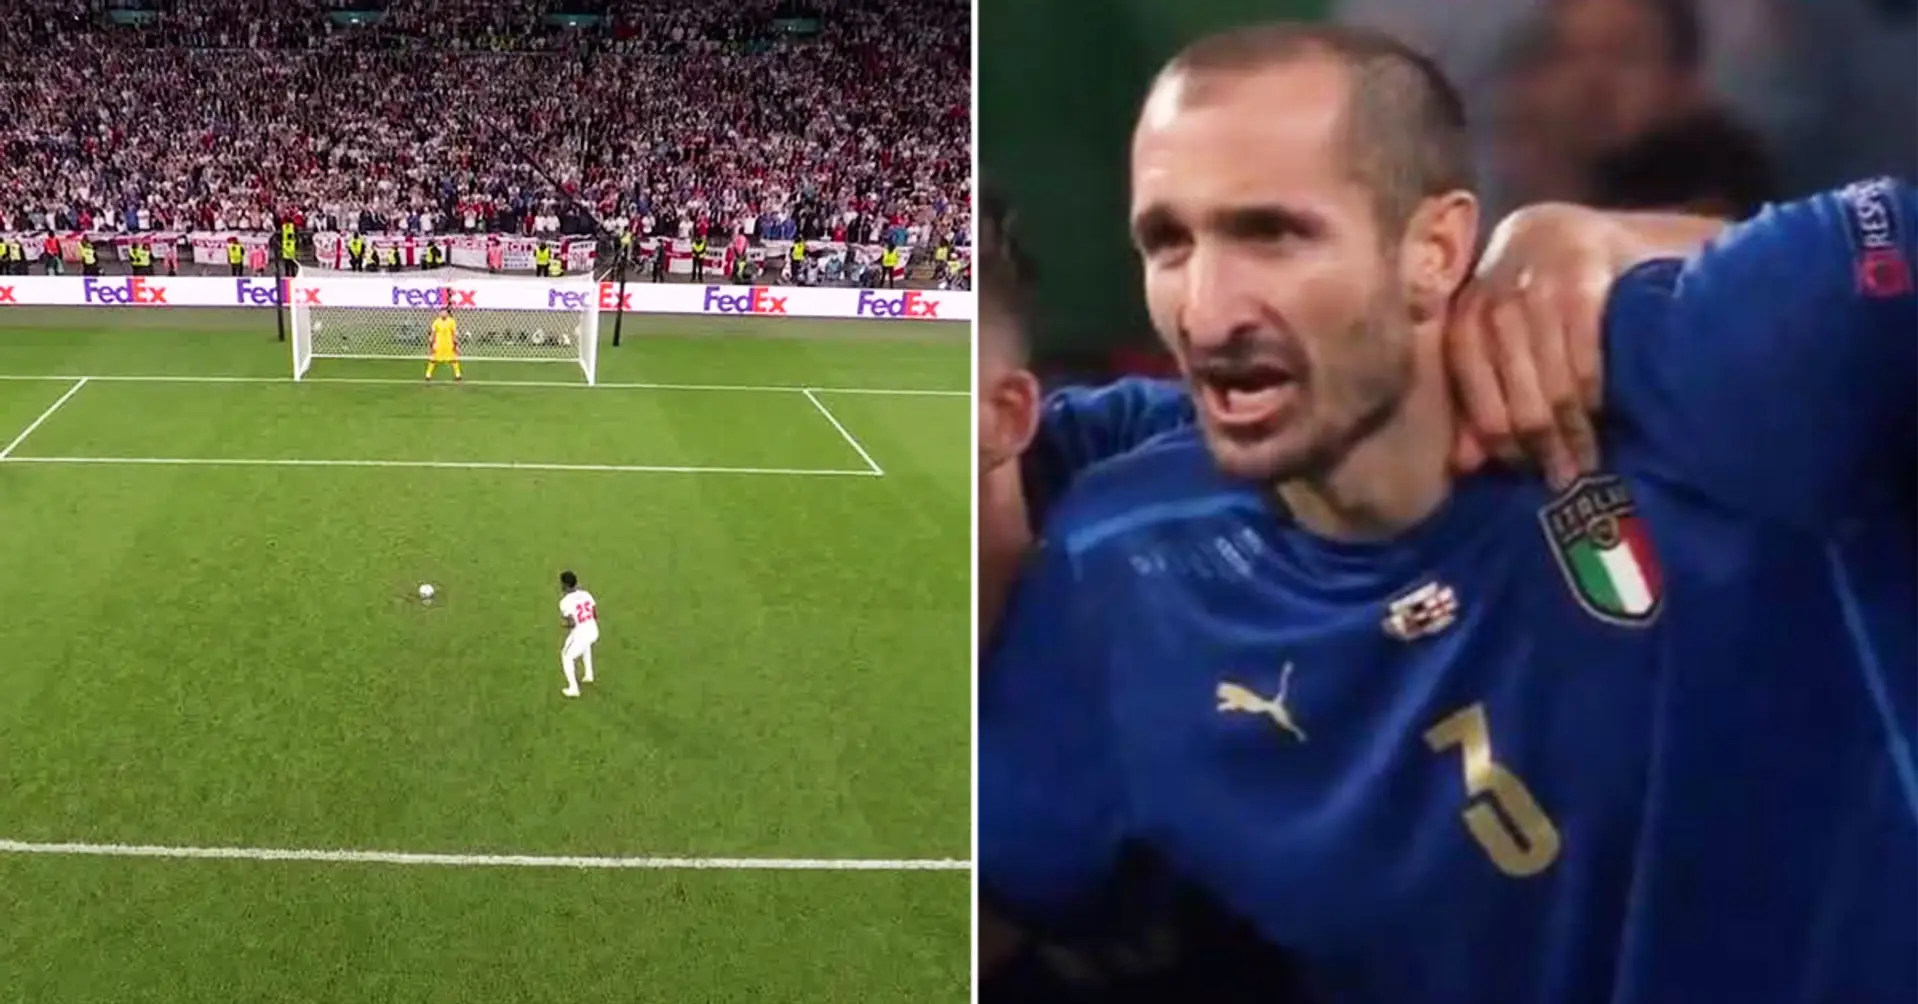 EXPLAINED: Why Chiellini screamed ‘KIRIKOCHO’ before Saka’s penalty and what it means